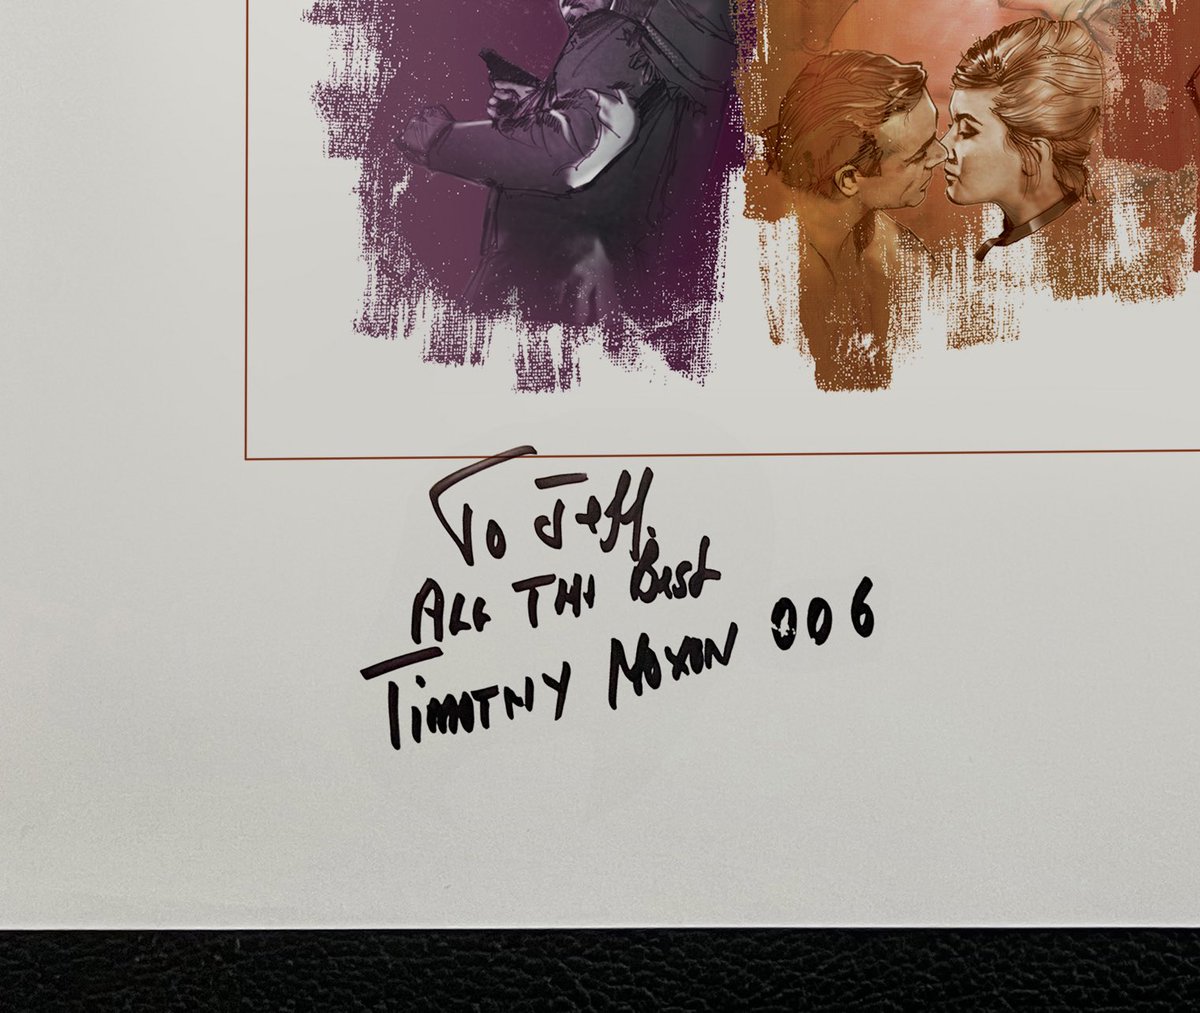 The print is from 2000, the signature happened a year later. Timothy Moxon was an English-born actor, probably best known for playing Strangways in the first James Bond film Dr. No. He was such a nice man.
I love how he signed the litho as 006. #Strangways  #DrNo  #JamesBond